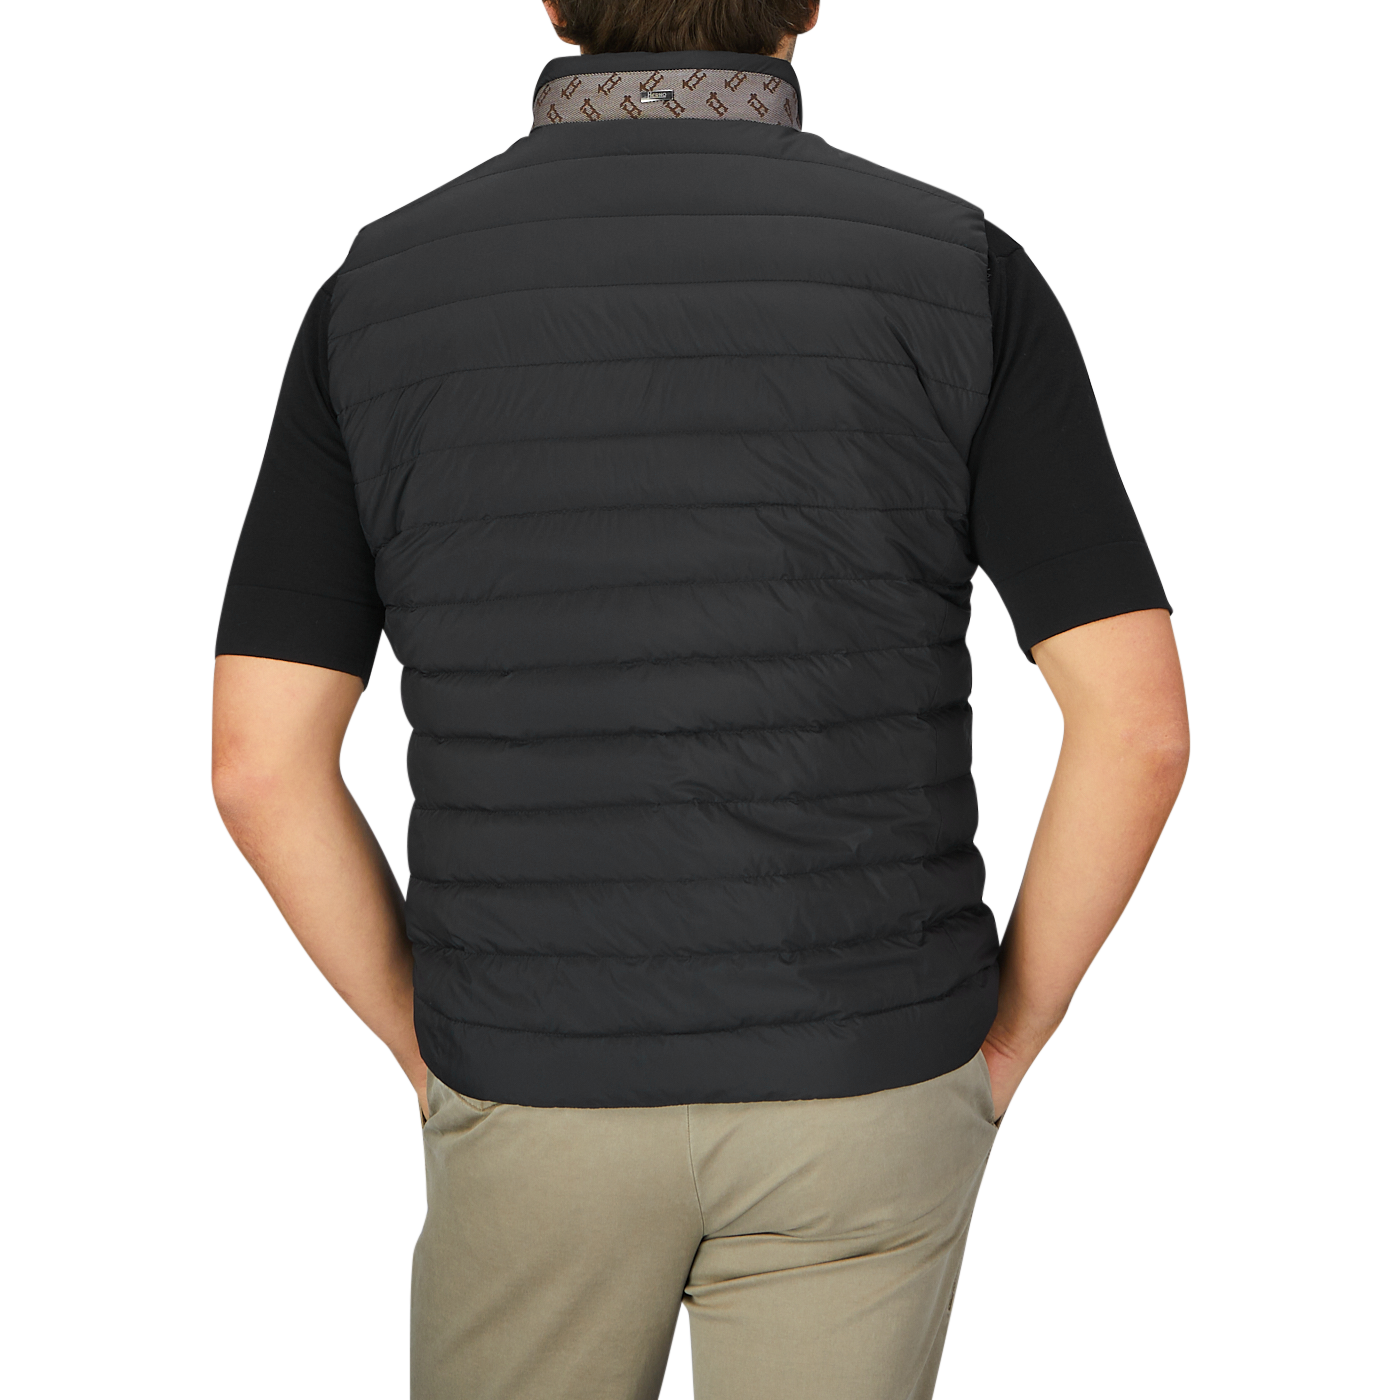 The back view of a man wearing an Italian Herno Black Nylon Goose Down Quilted Gilet.